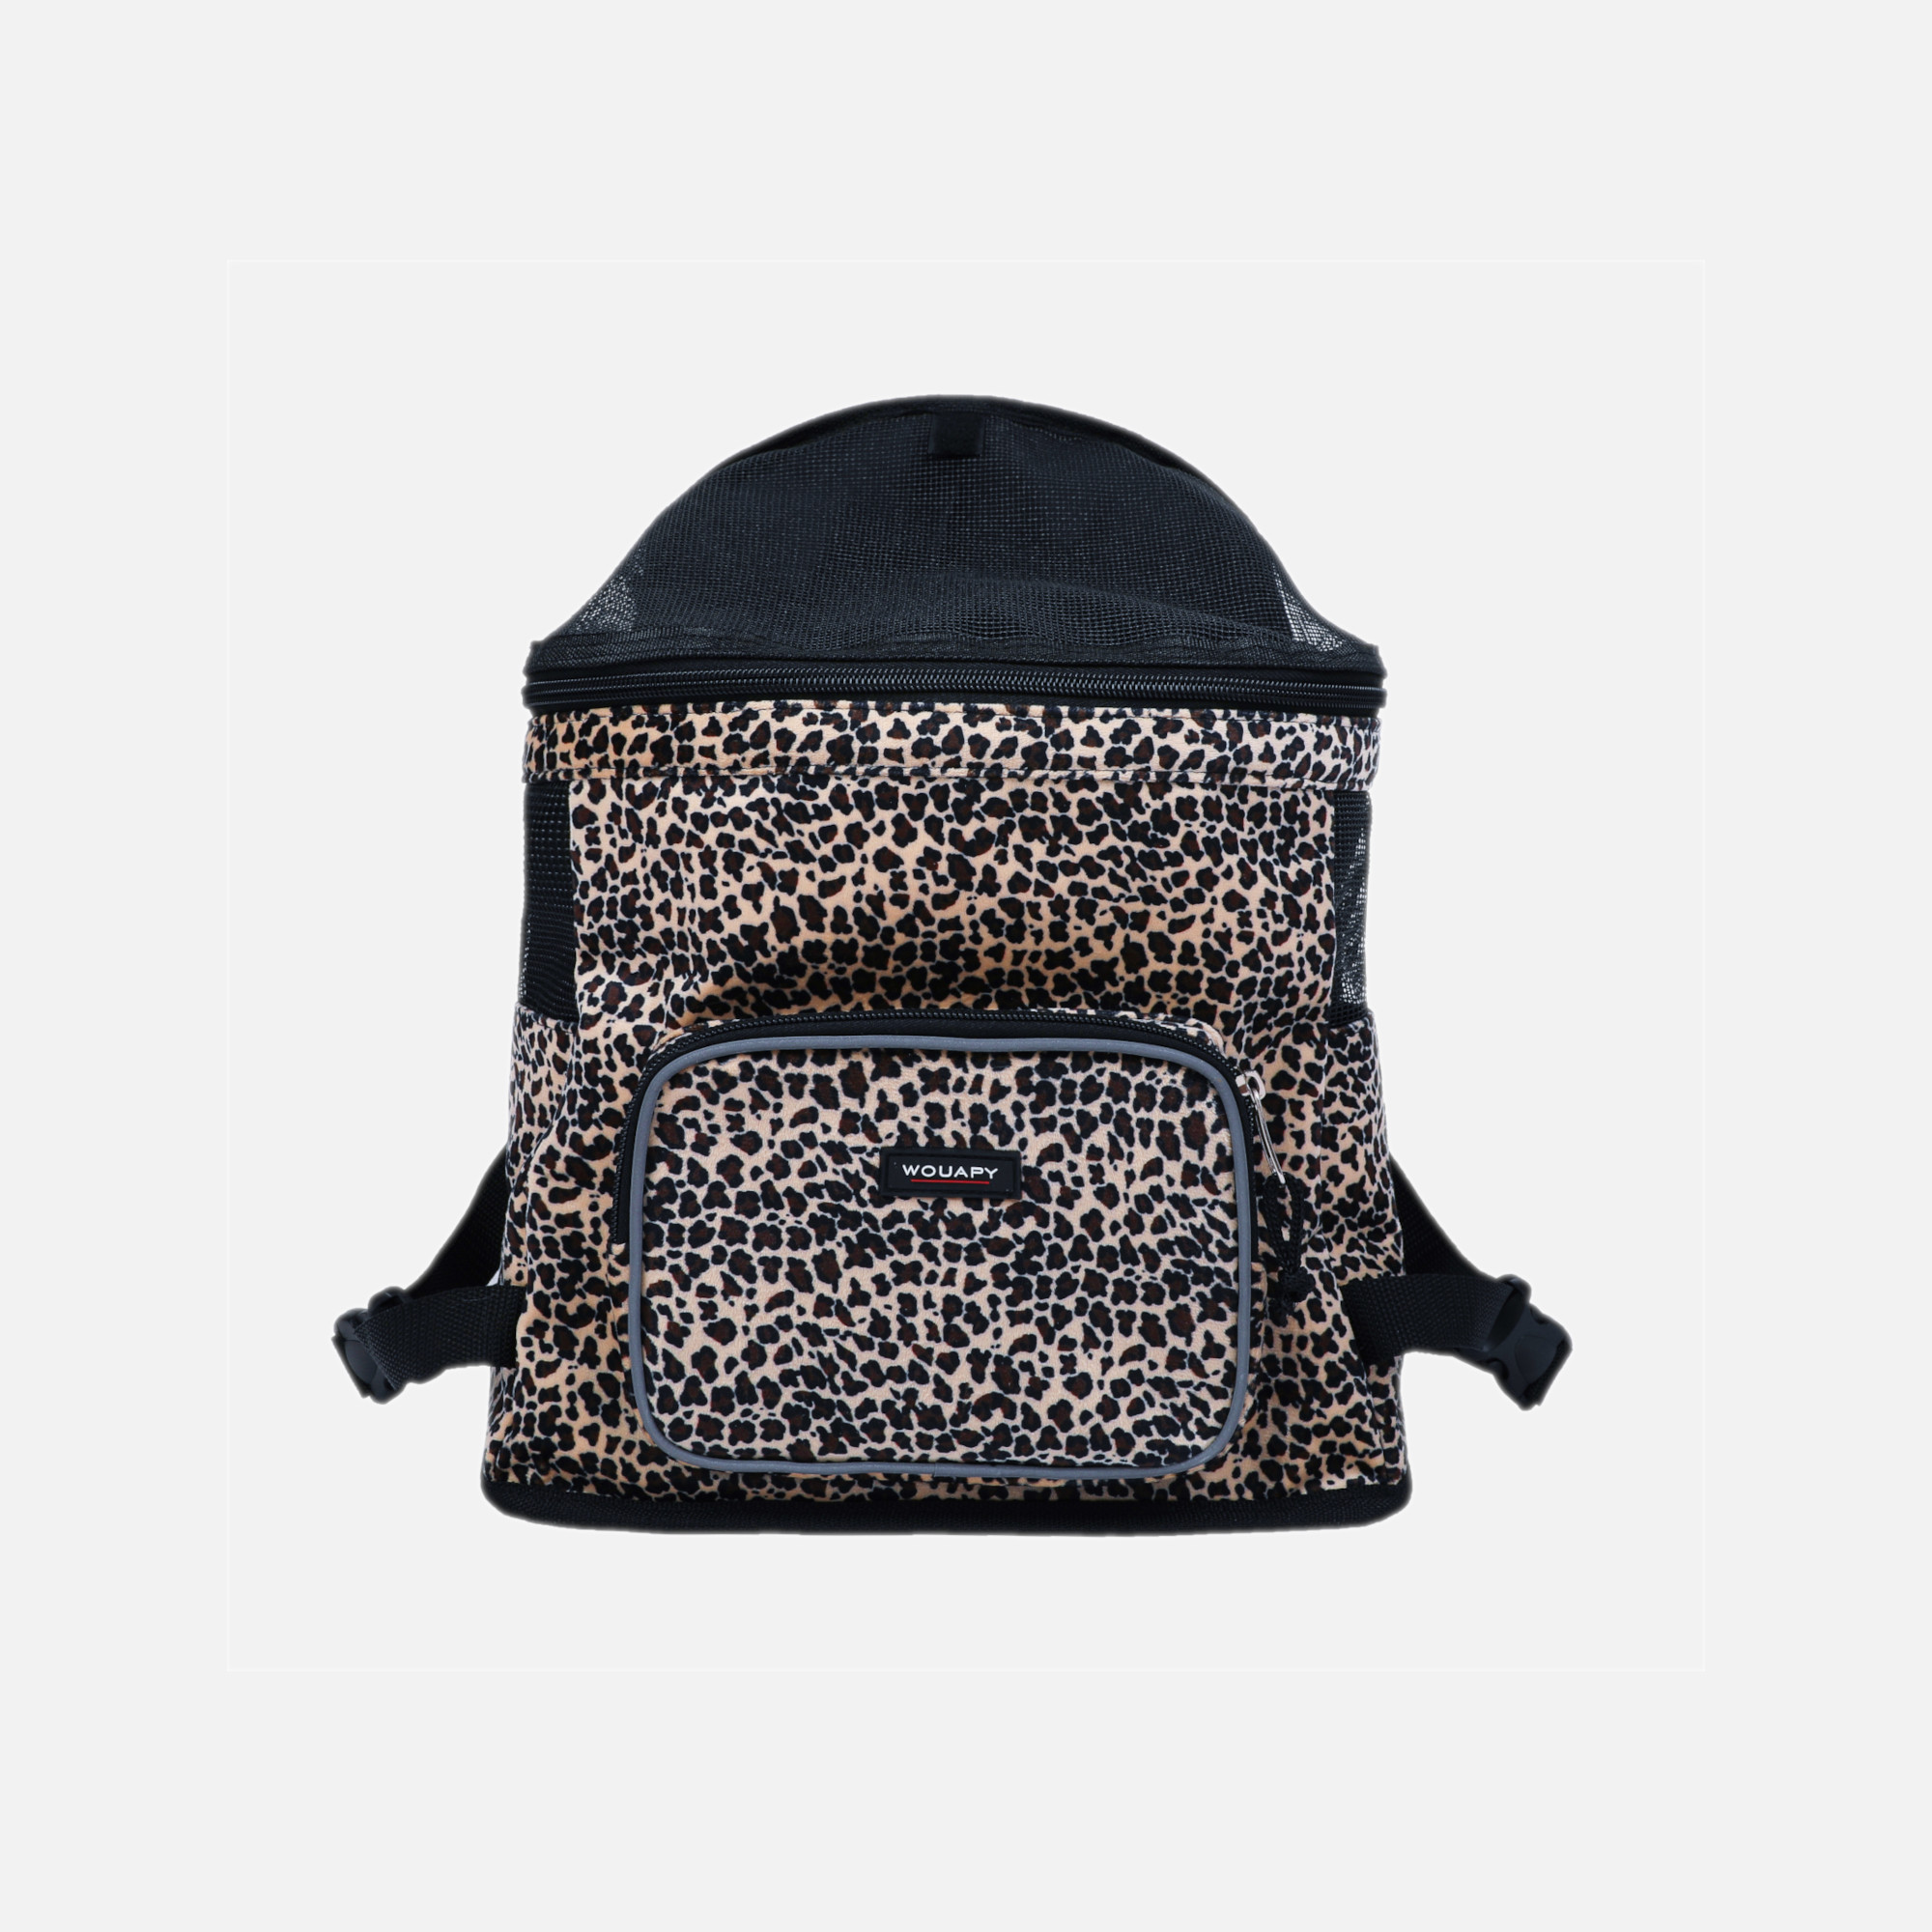 Sac ventral Leopard Wouapy